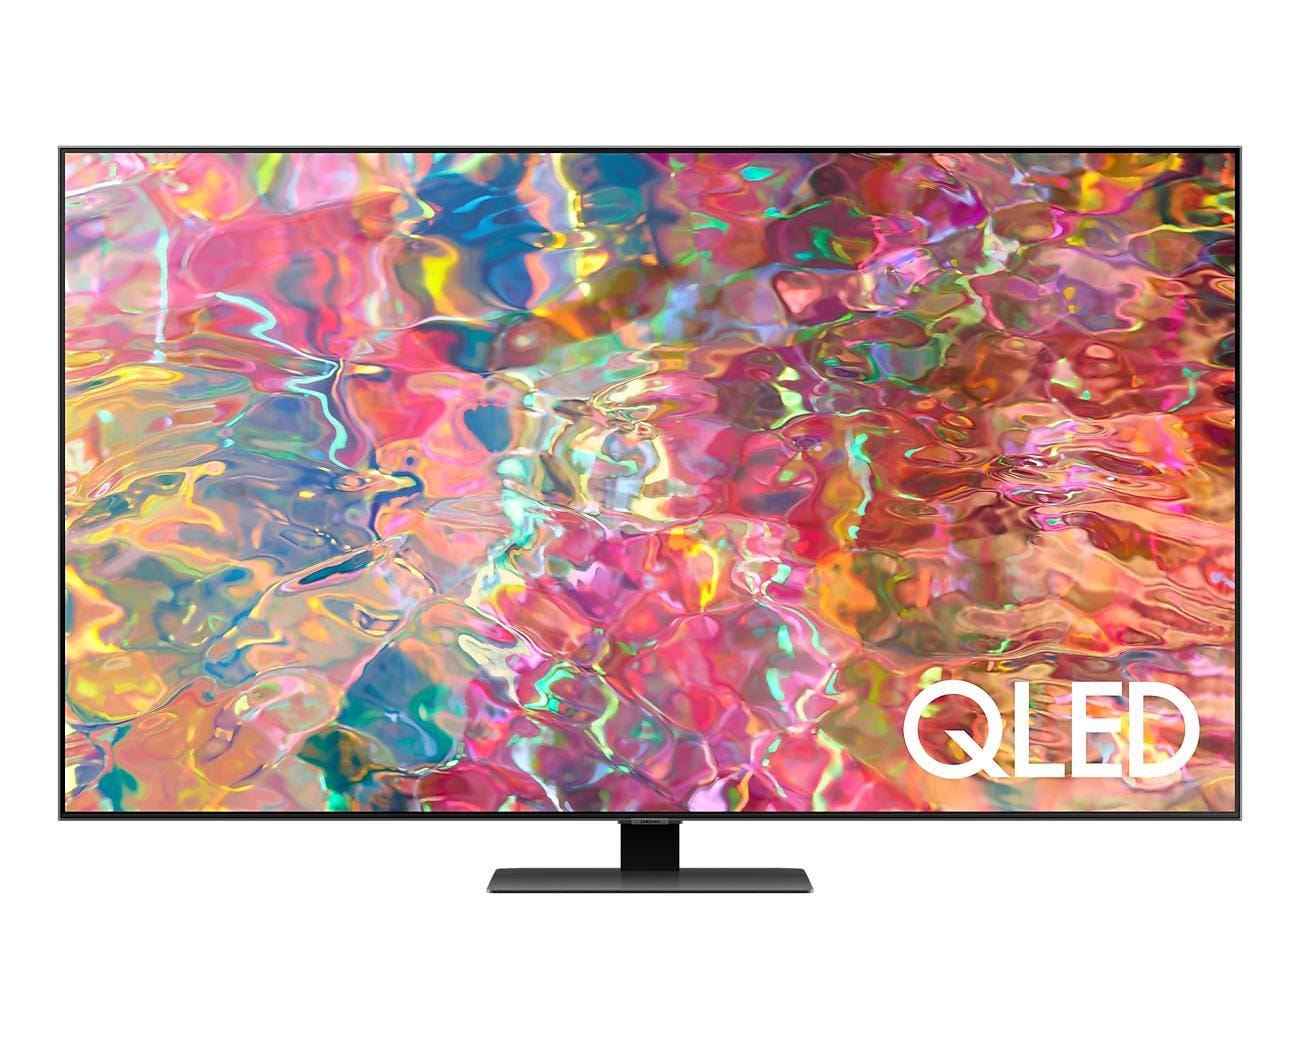 Samsung 75 Inch 4K UHD Smart QLED TV with Built in Receiver - 75Q80CA